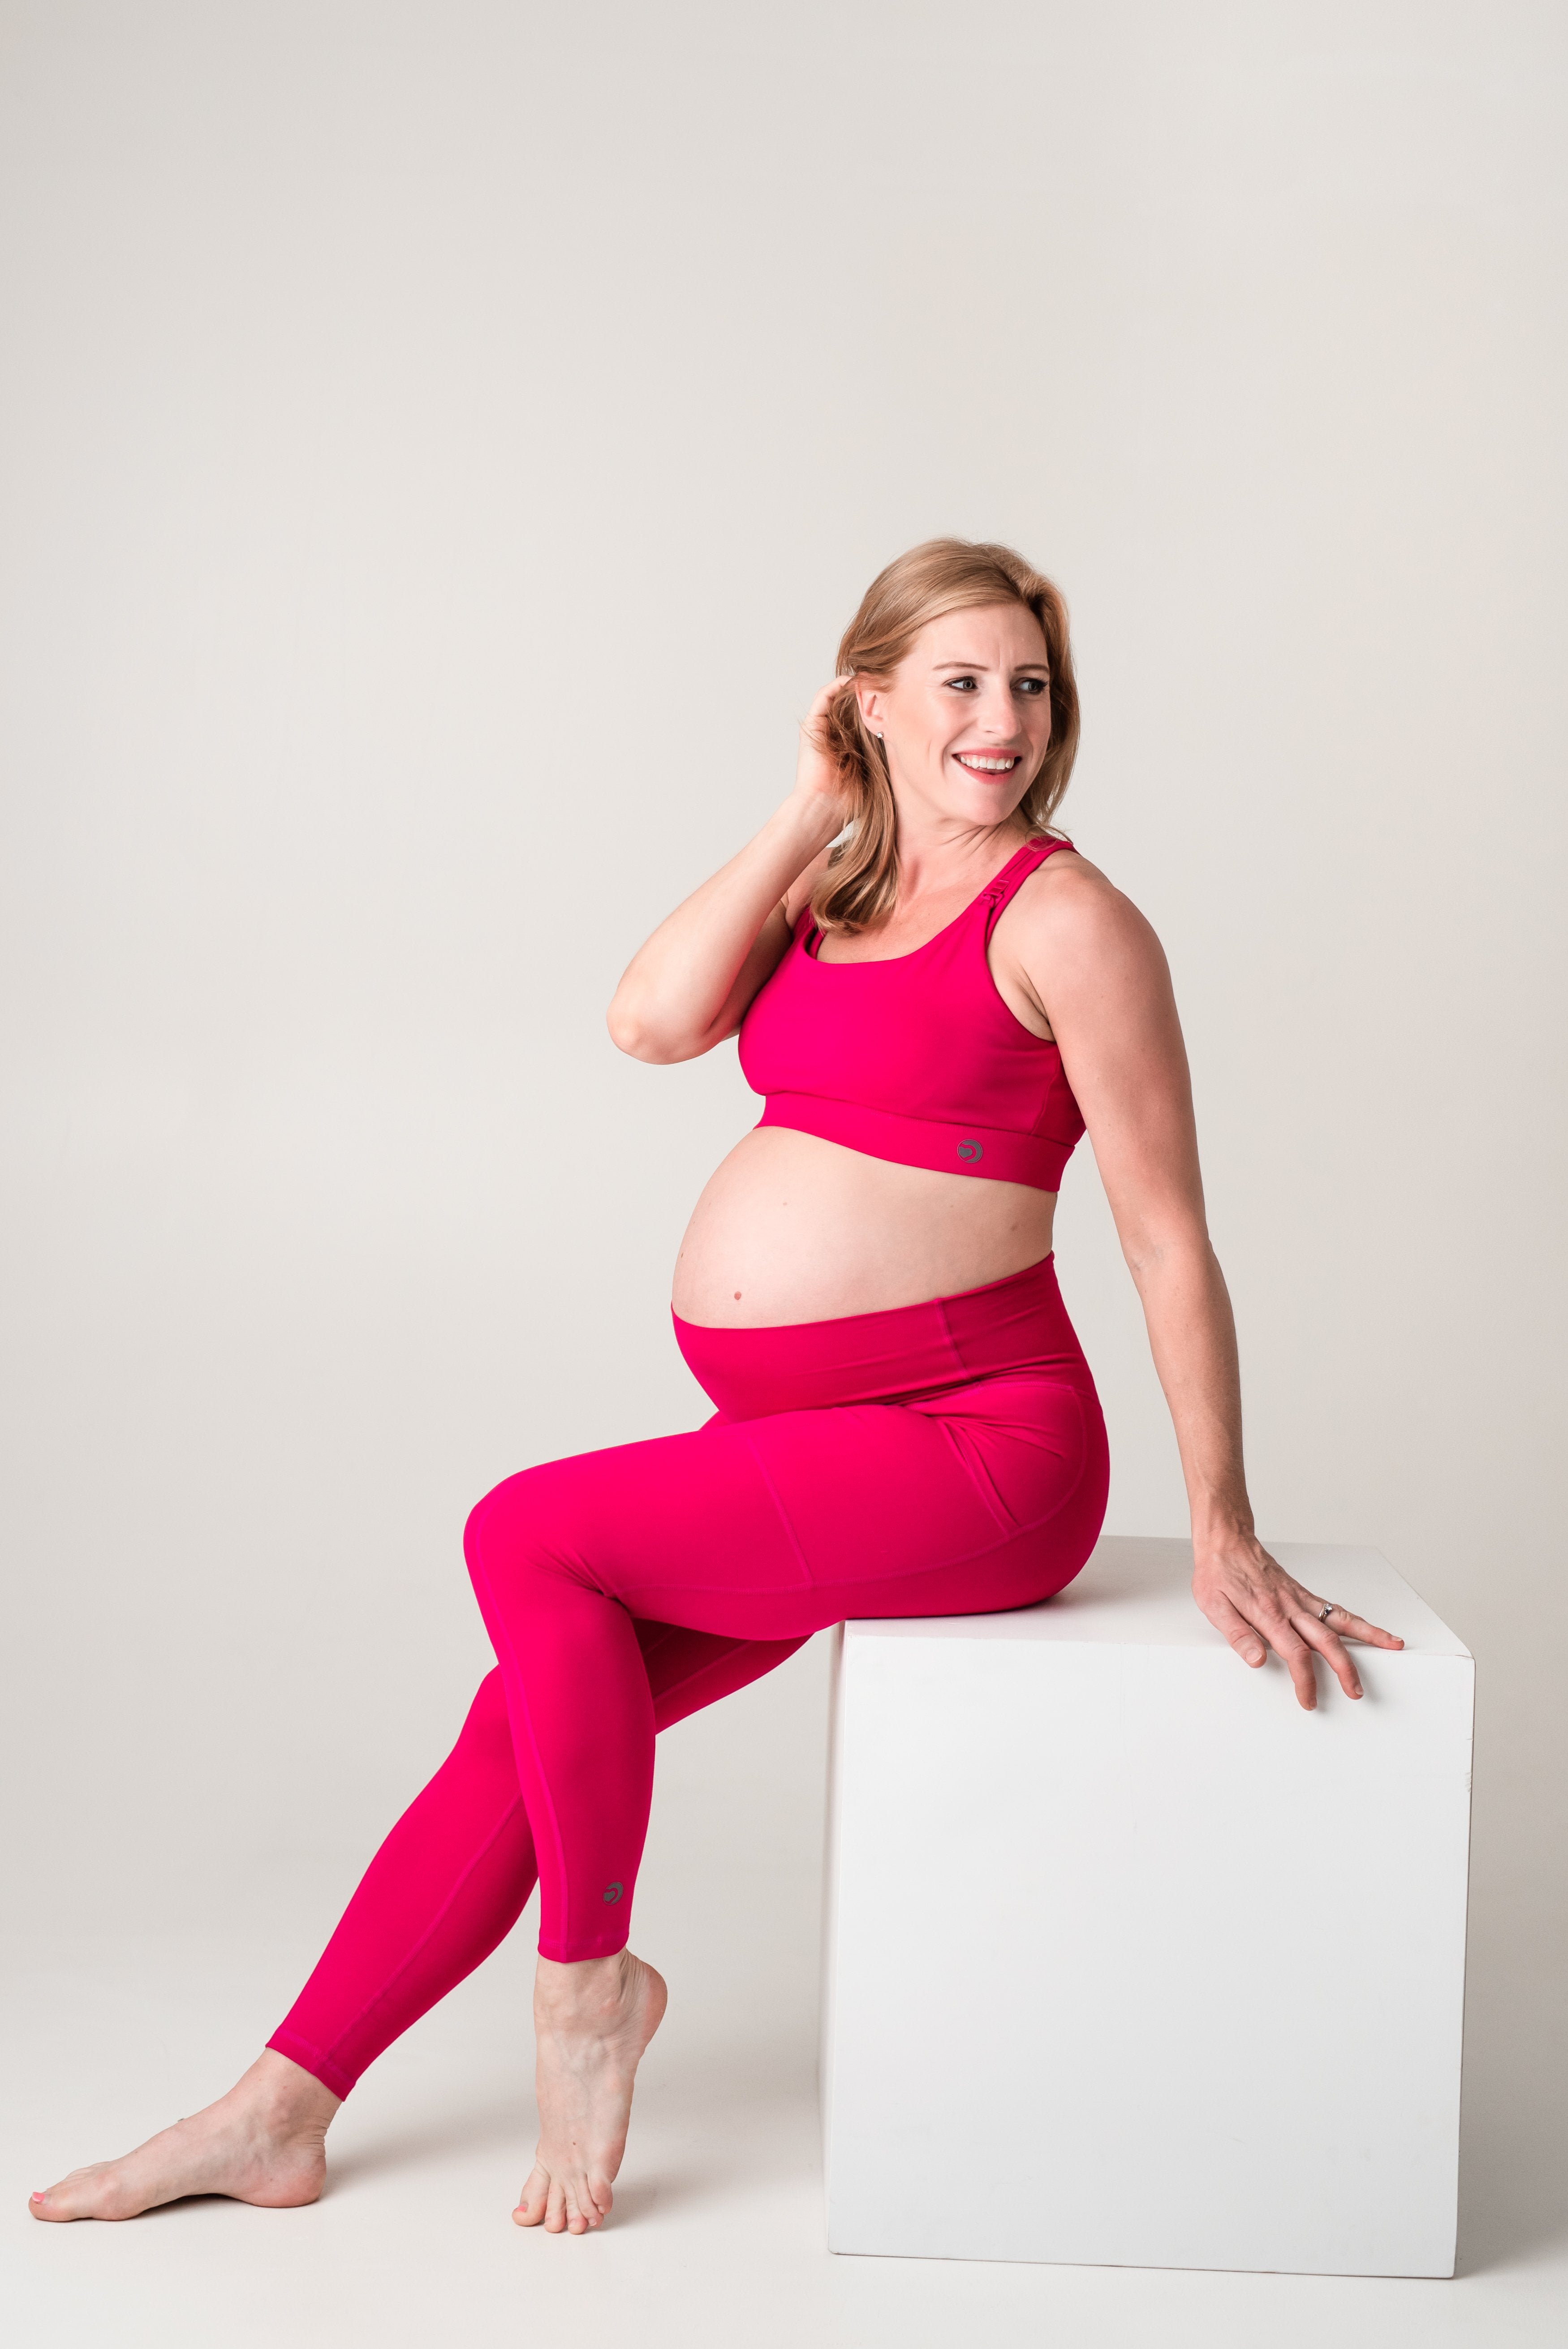 Pregnant Lady in pink sports wear leaning against a white block